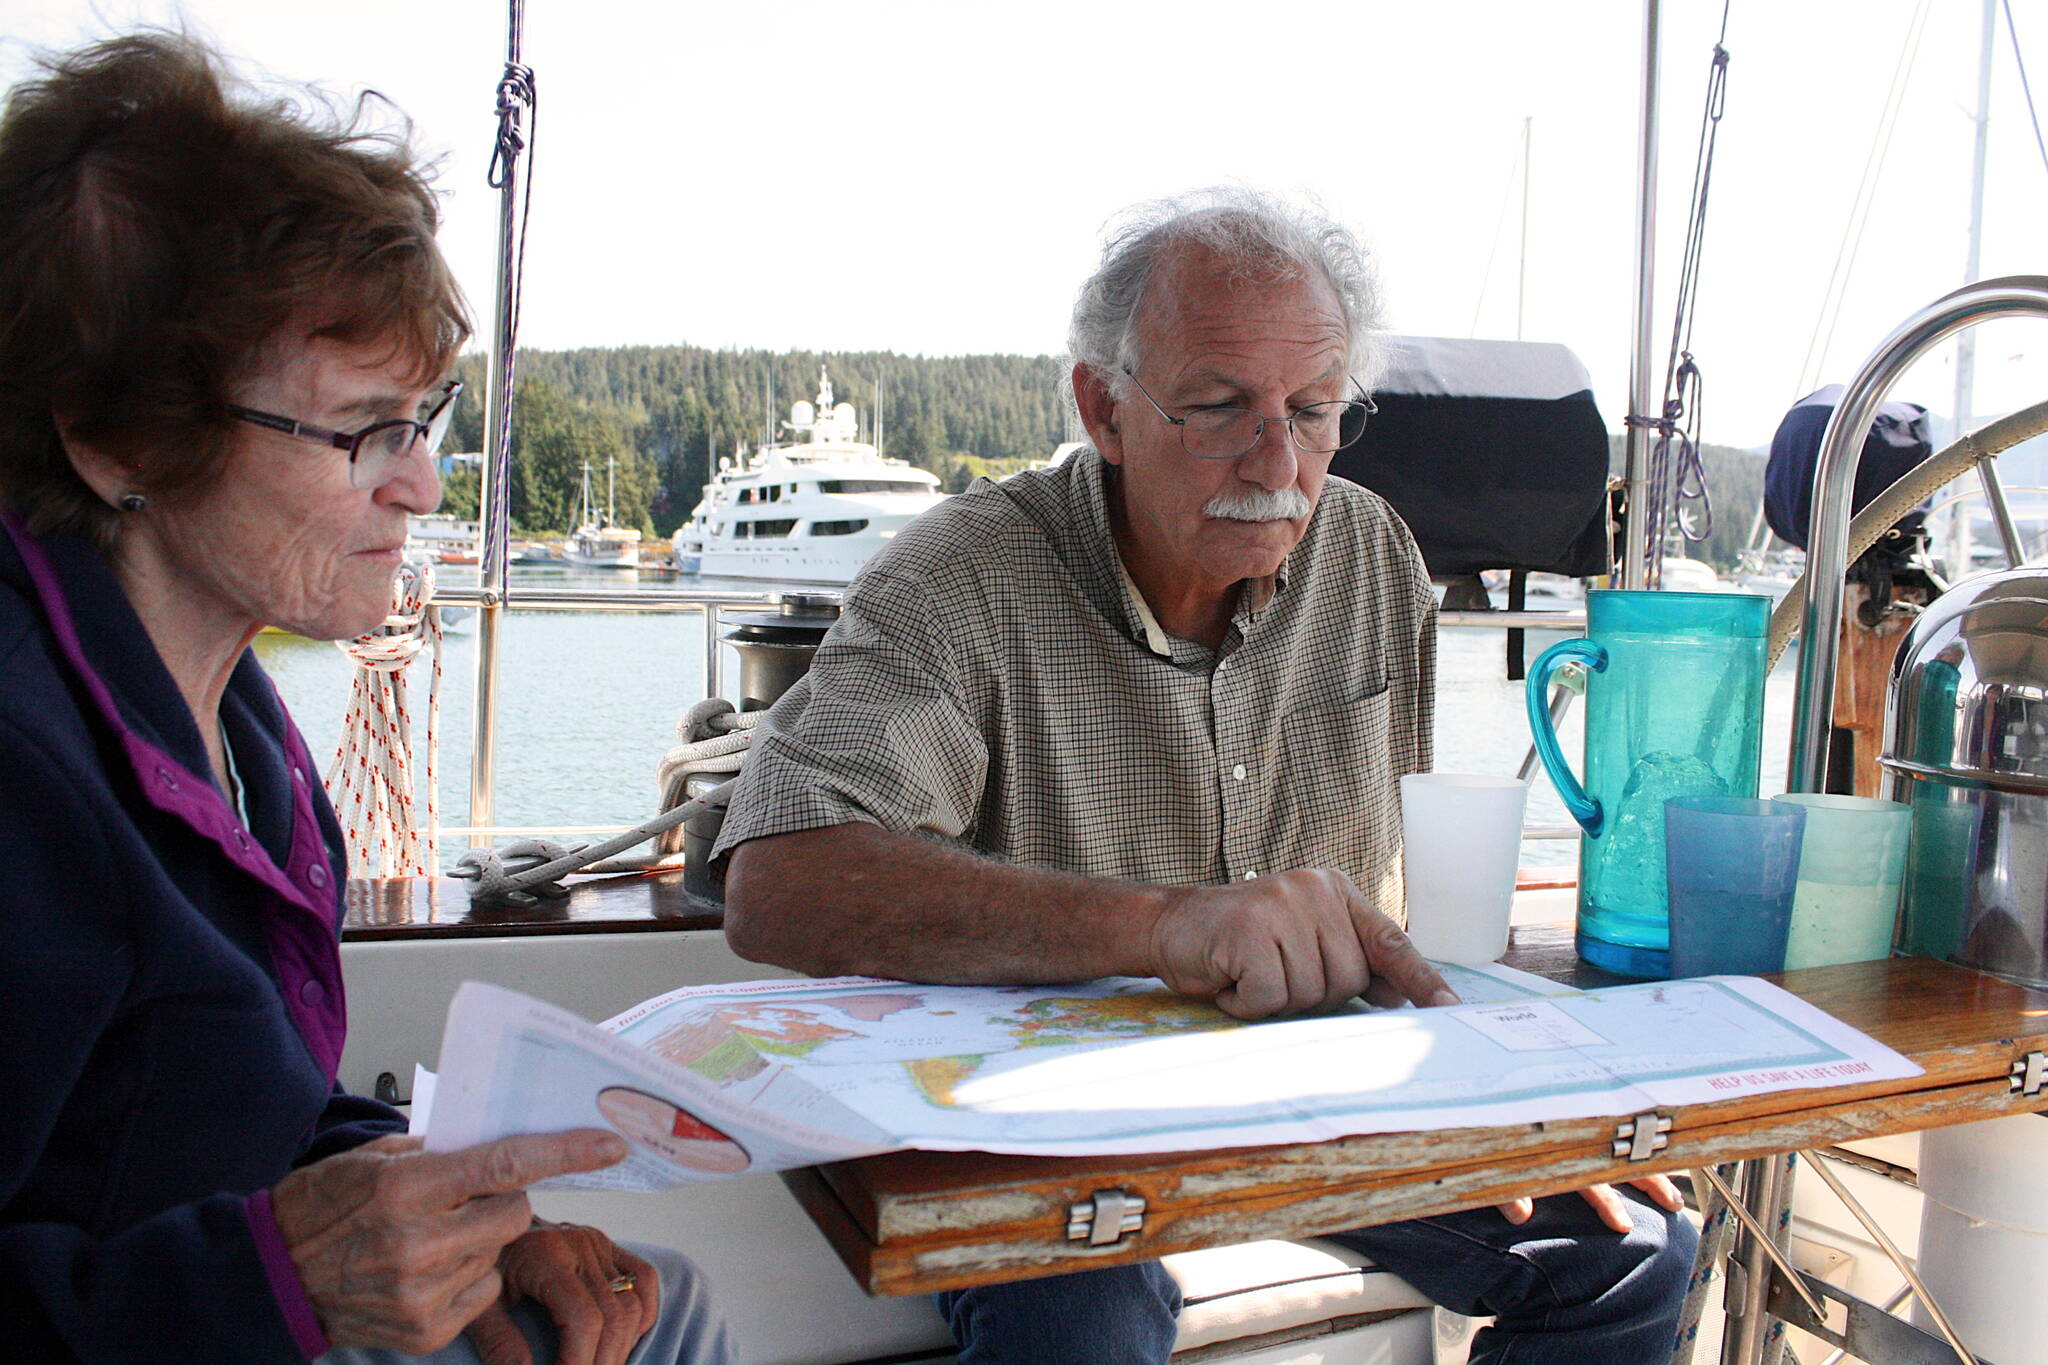 Marjorie Menzi and William “Bill” Heumann discuss their 50,000-nautical-mile circumnavigation of the world aboard their sailboat, Second Wind, on Sunday at Statter Harbor. (Therese Pokorney / Juneau Empire)